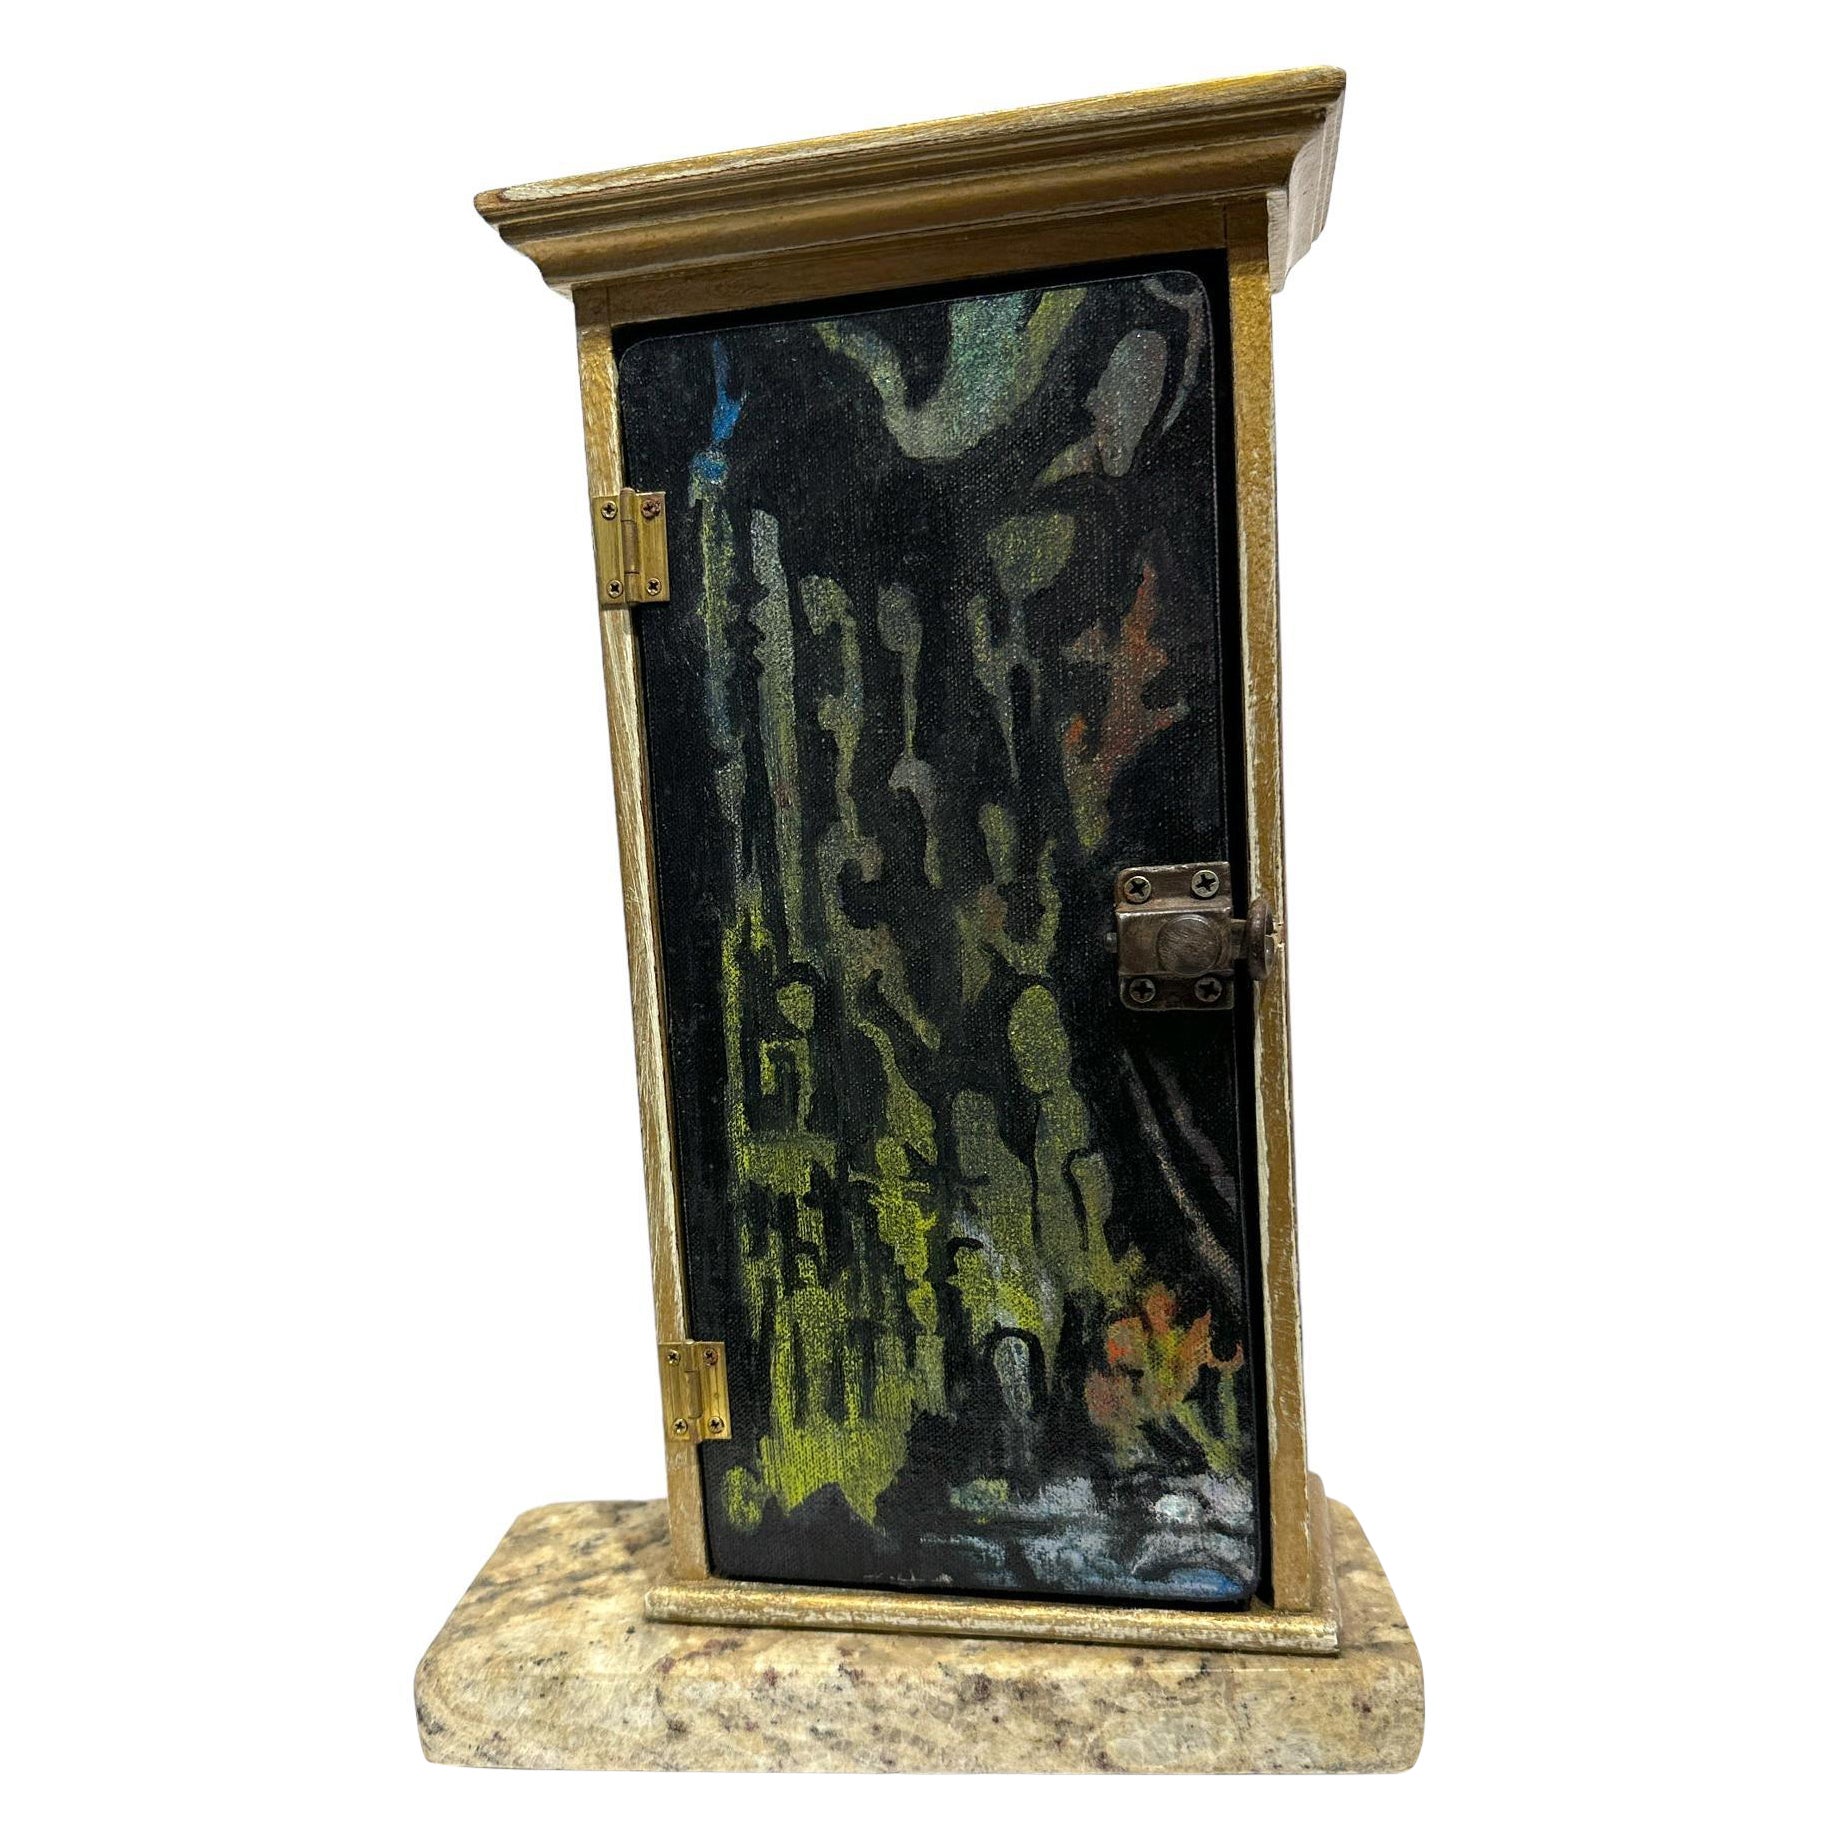 The Closet, Vanity Mirror Objet d'Art Box with Opening Door and Small Portraits For Sale